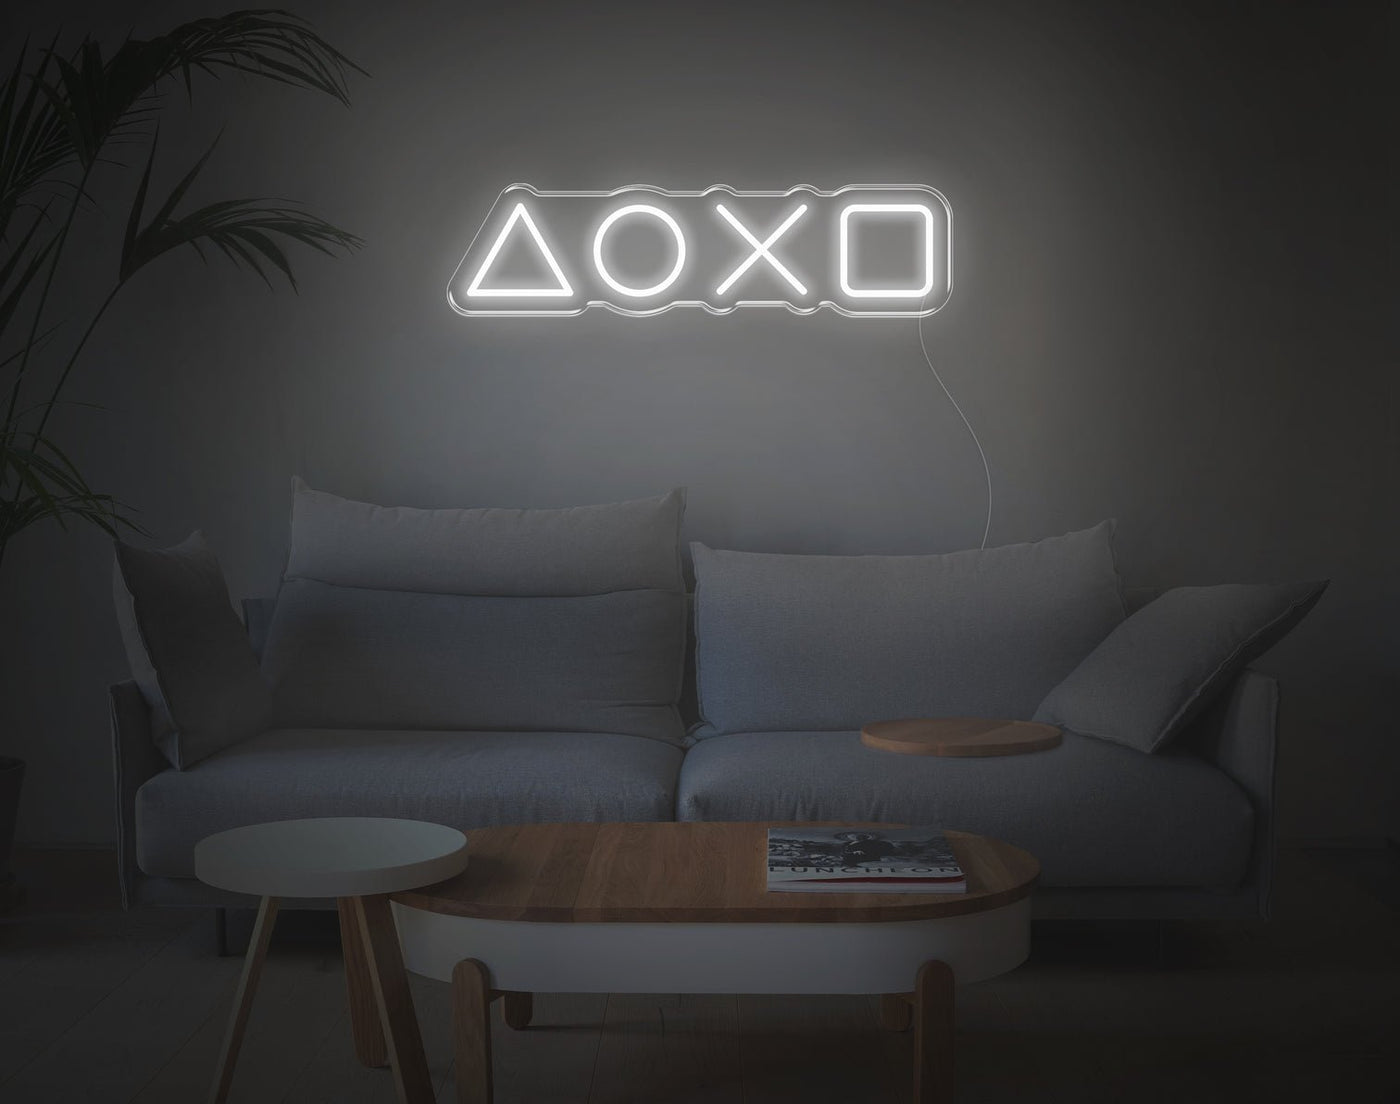 Aoxo LED Neon Sign